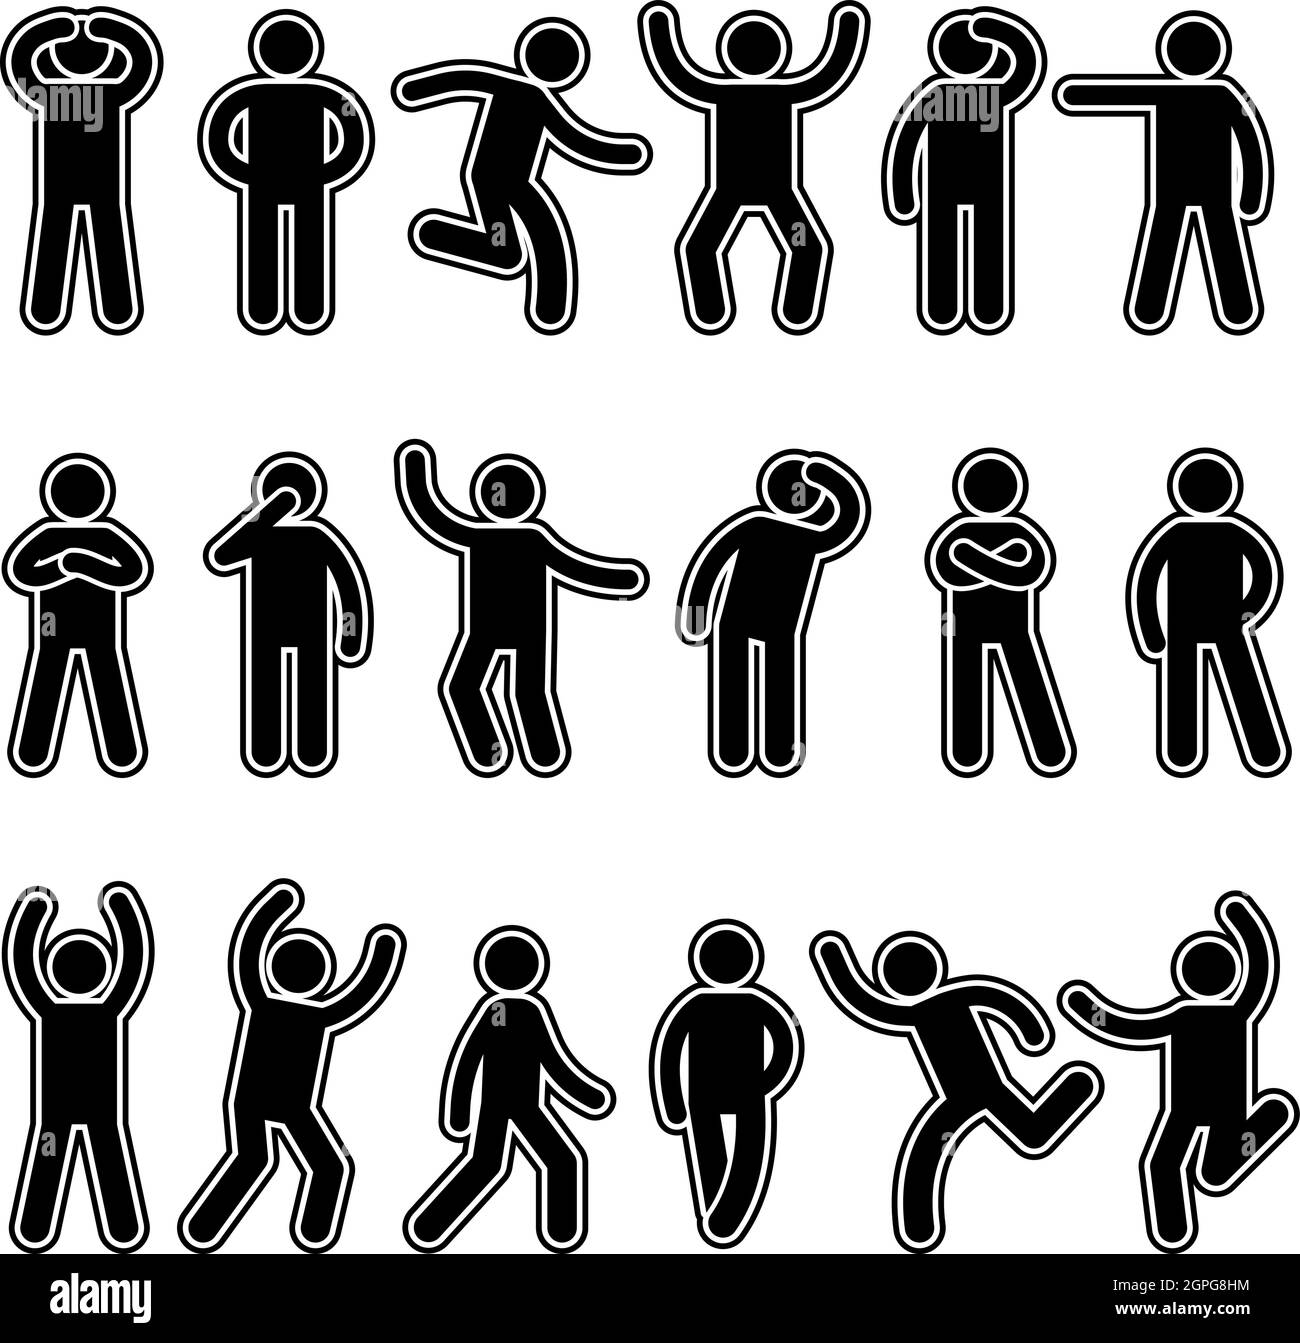 stickman icon, isolated pictogram stick figure man, various gestures with  hands, human symbol on white background Stock Vector